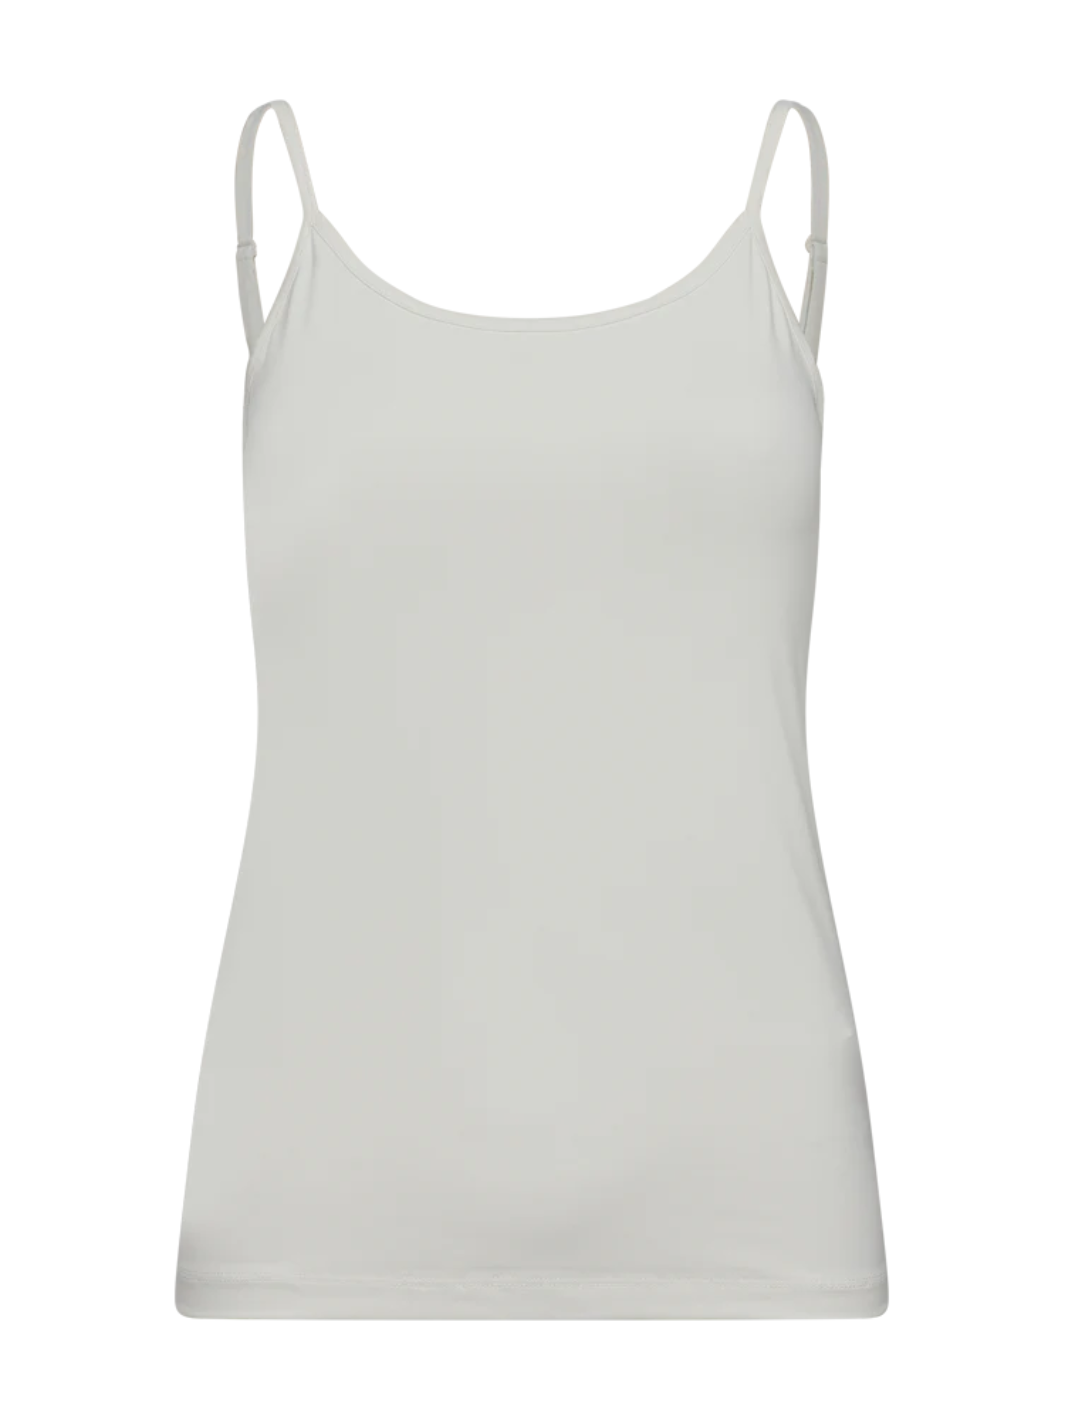 Freequent Cami Strap Top In White-Nicola Ross